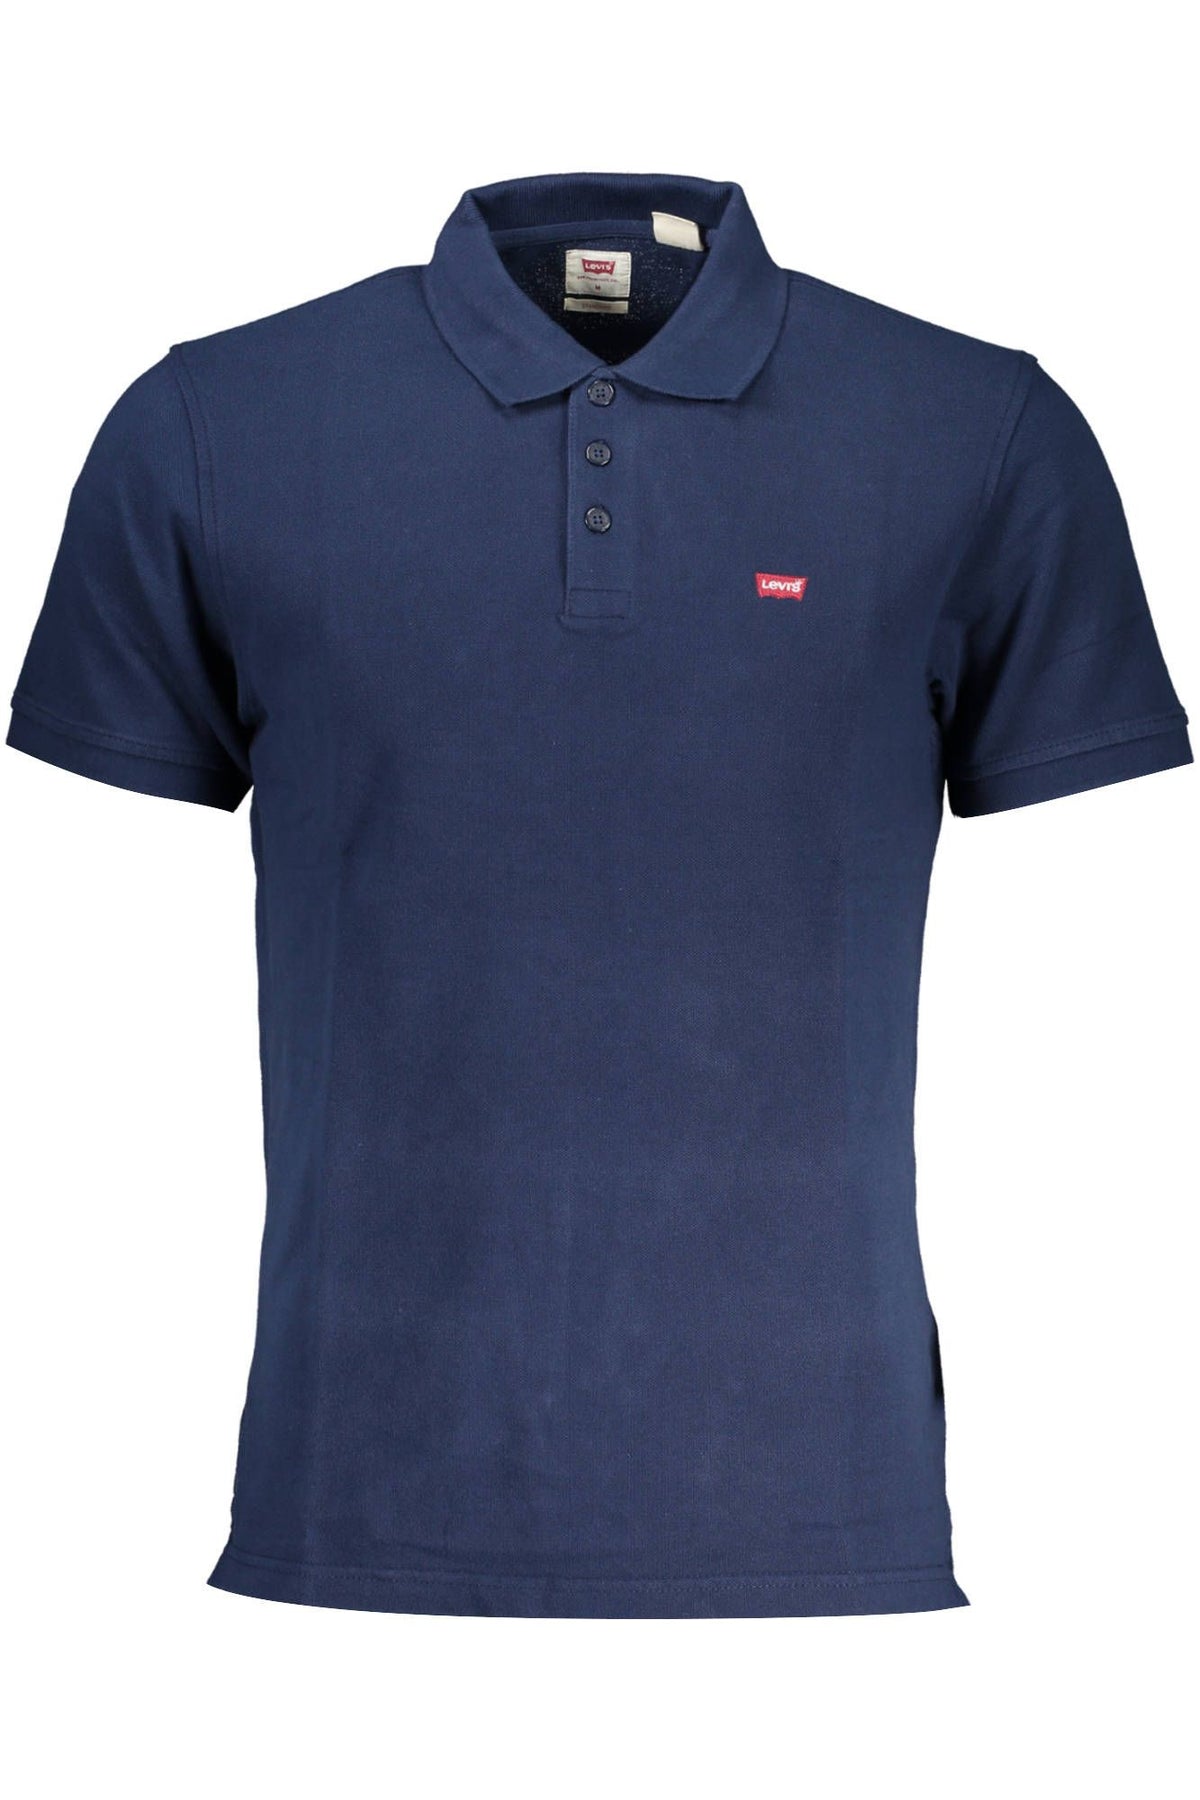 Levi's Chic Blue Cotton Polo Shirt with Logo Accent